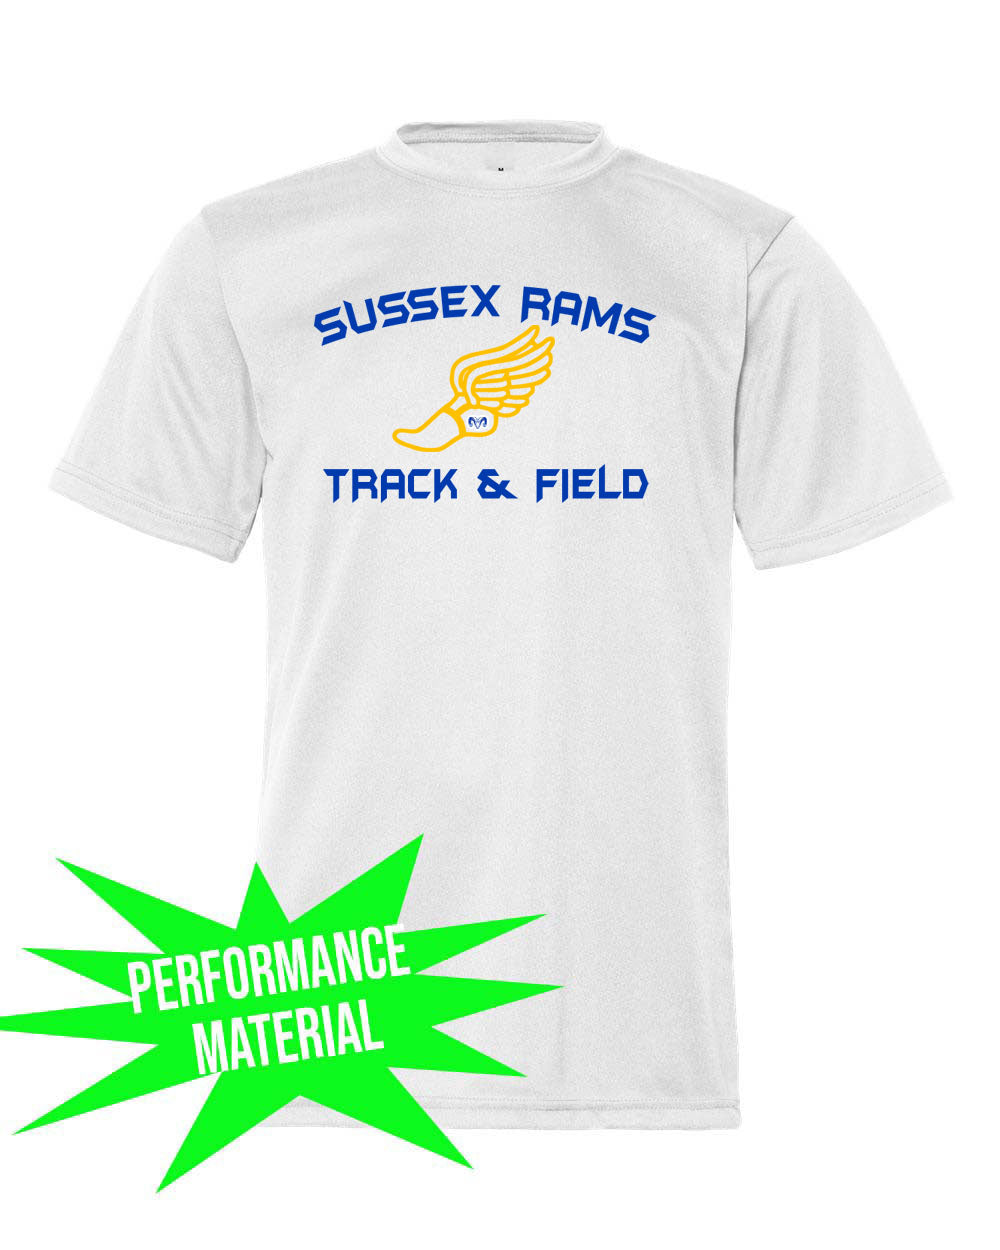 Sussex Rams Track Performance Material T-Shirt Design 2